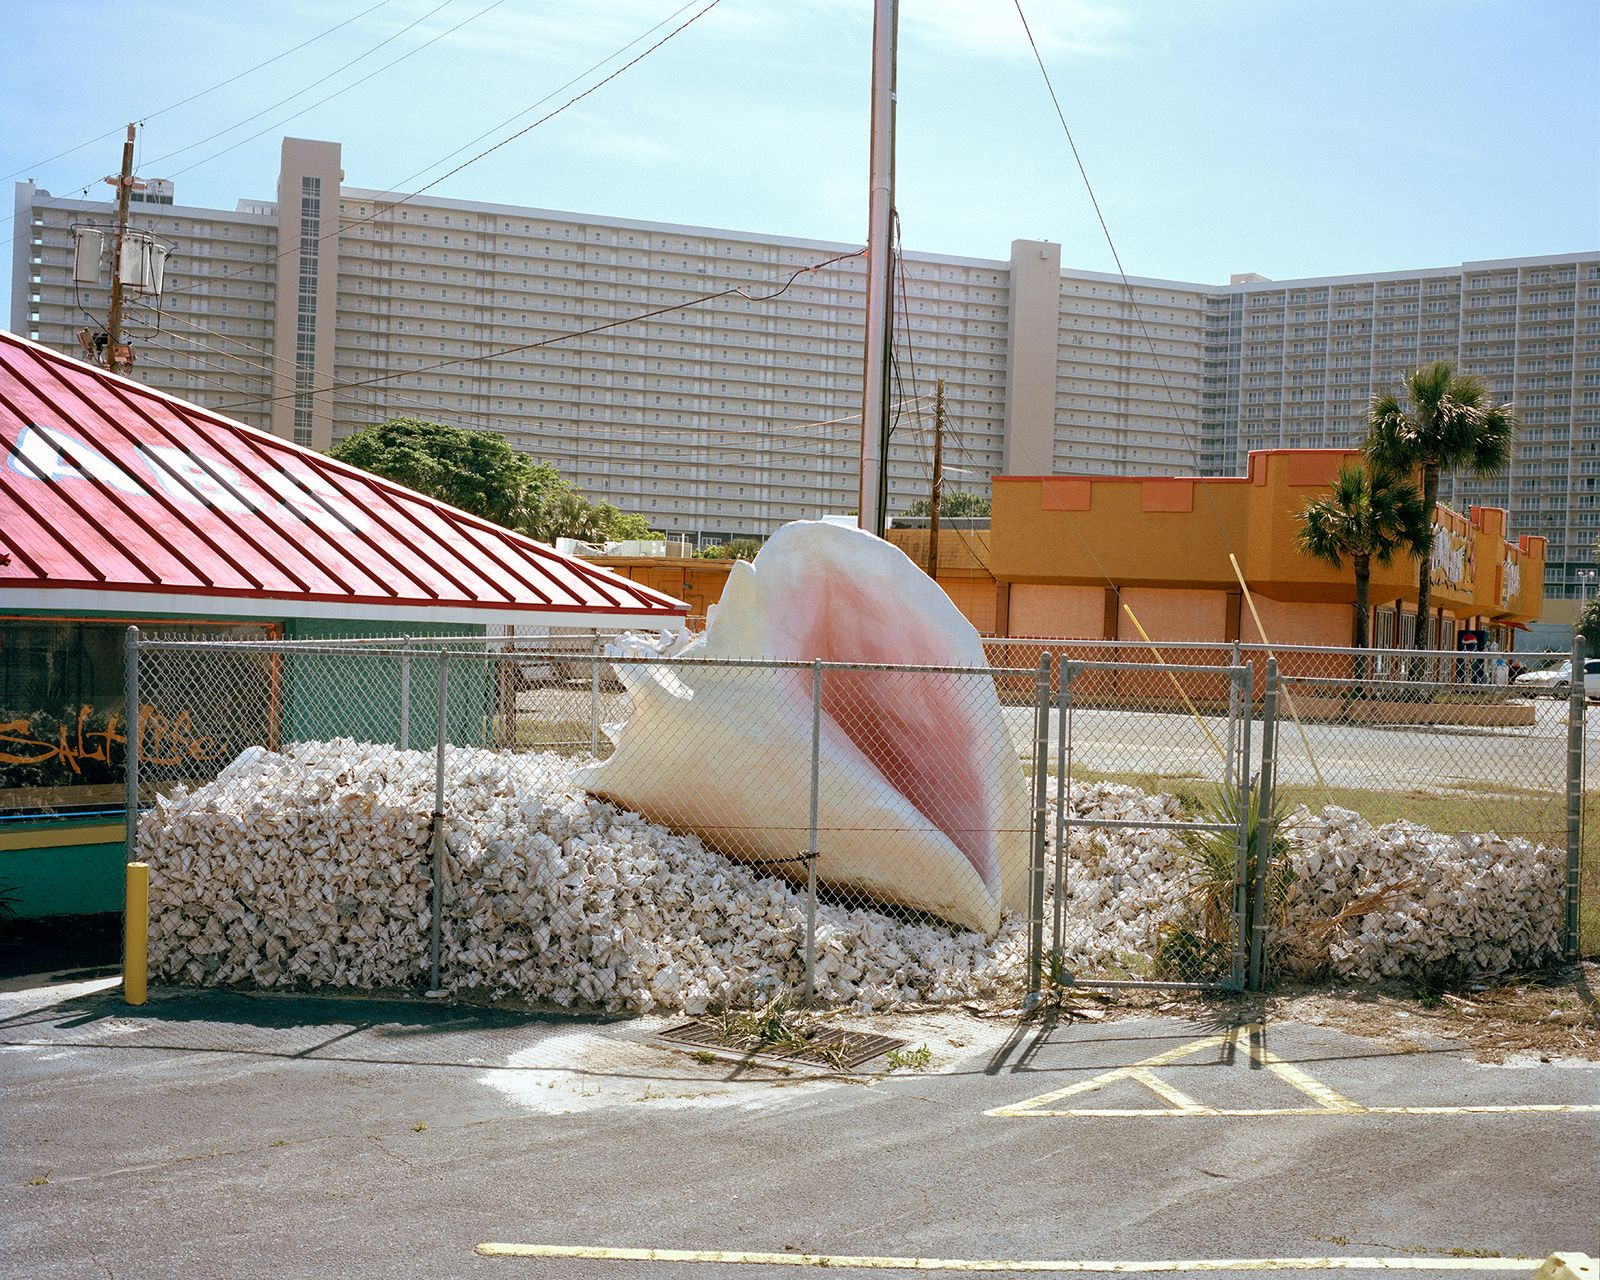 © Jose Castrellon - Image from the "Palindrome" photography project